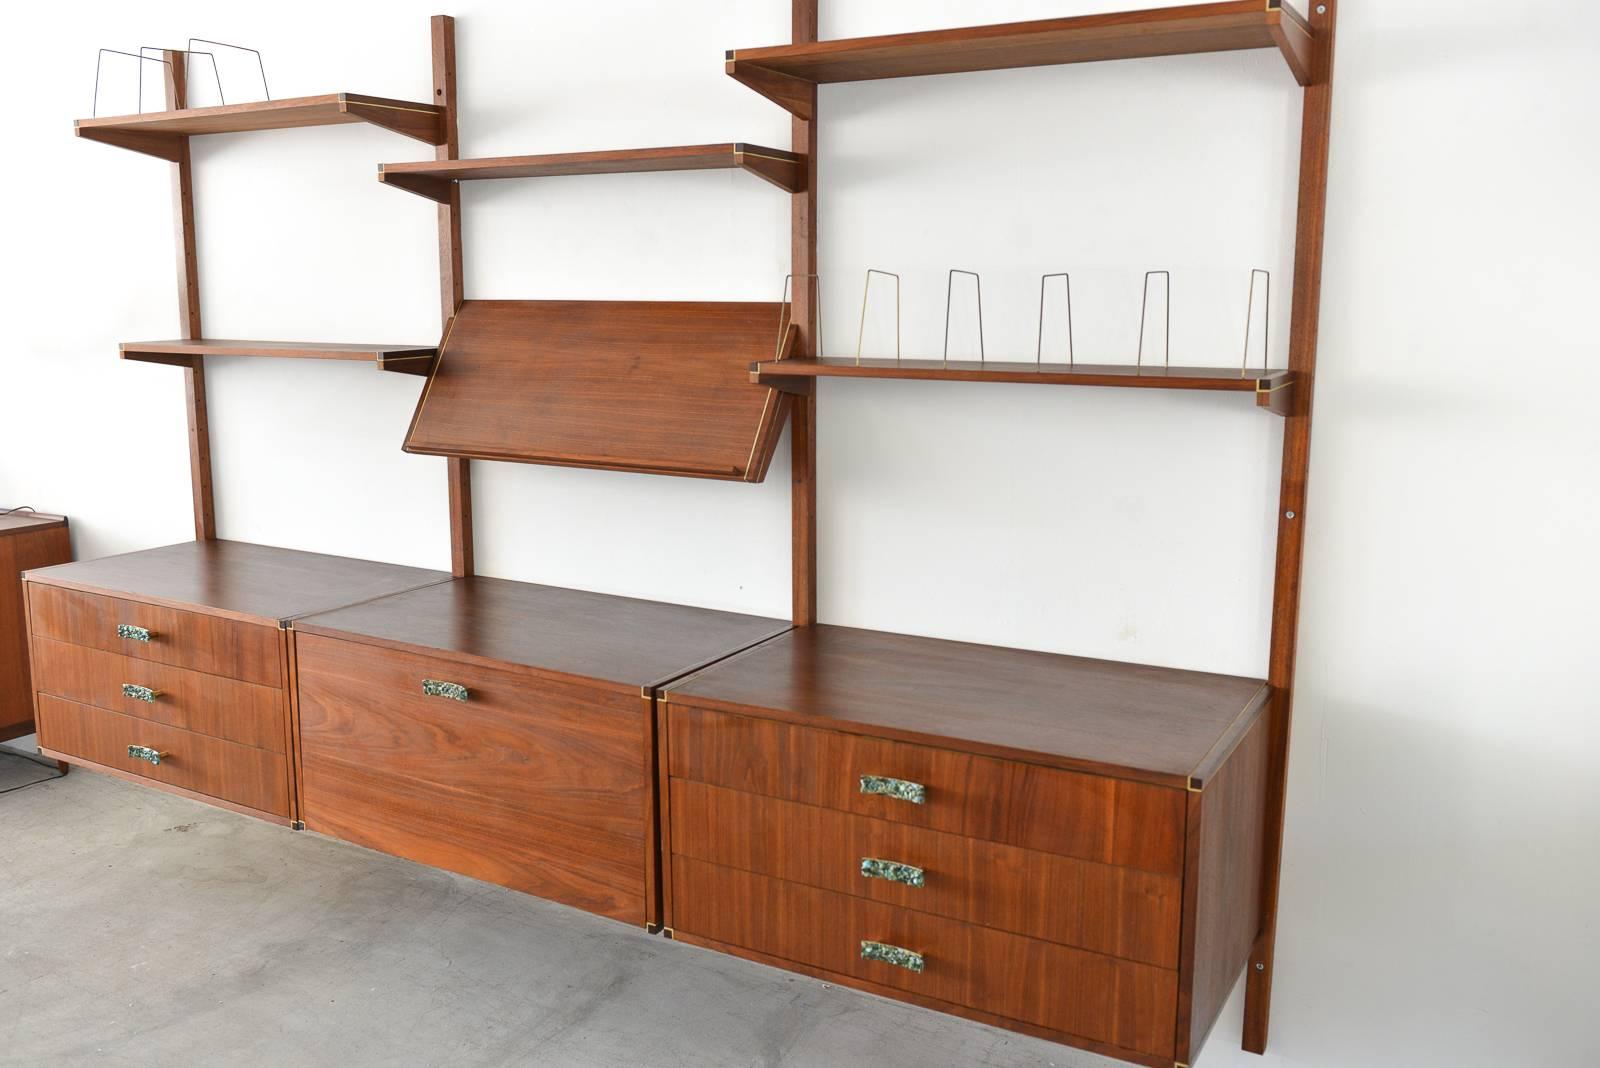 Walnut and brass shelving wall unit by Gerald McCabe, circa 1970. Beautiful walnut grain and unique rare brass finishes (as opposed to the brushed aluminium, which is common) unique precious stone inlay with brass hardware. All single shelves have